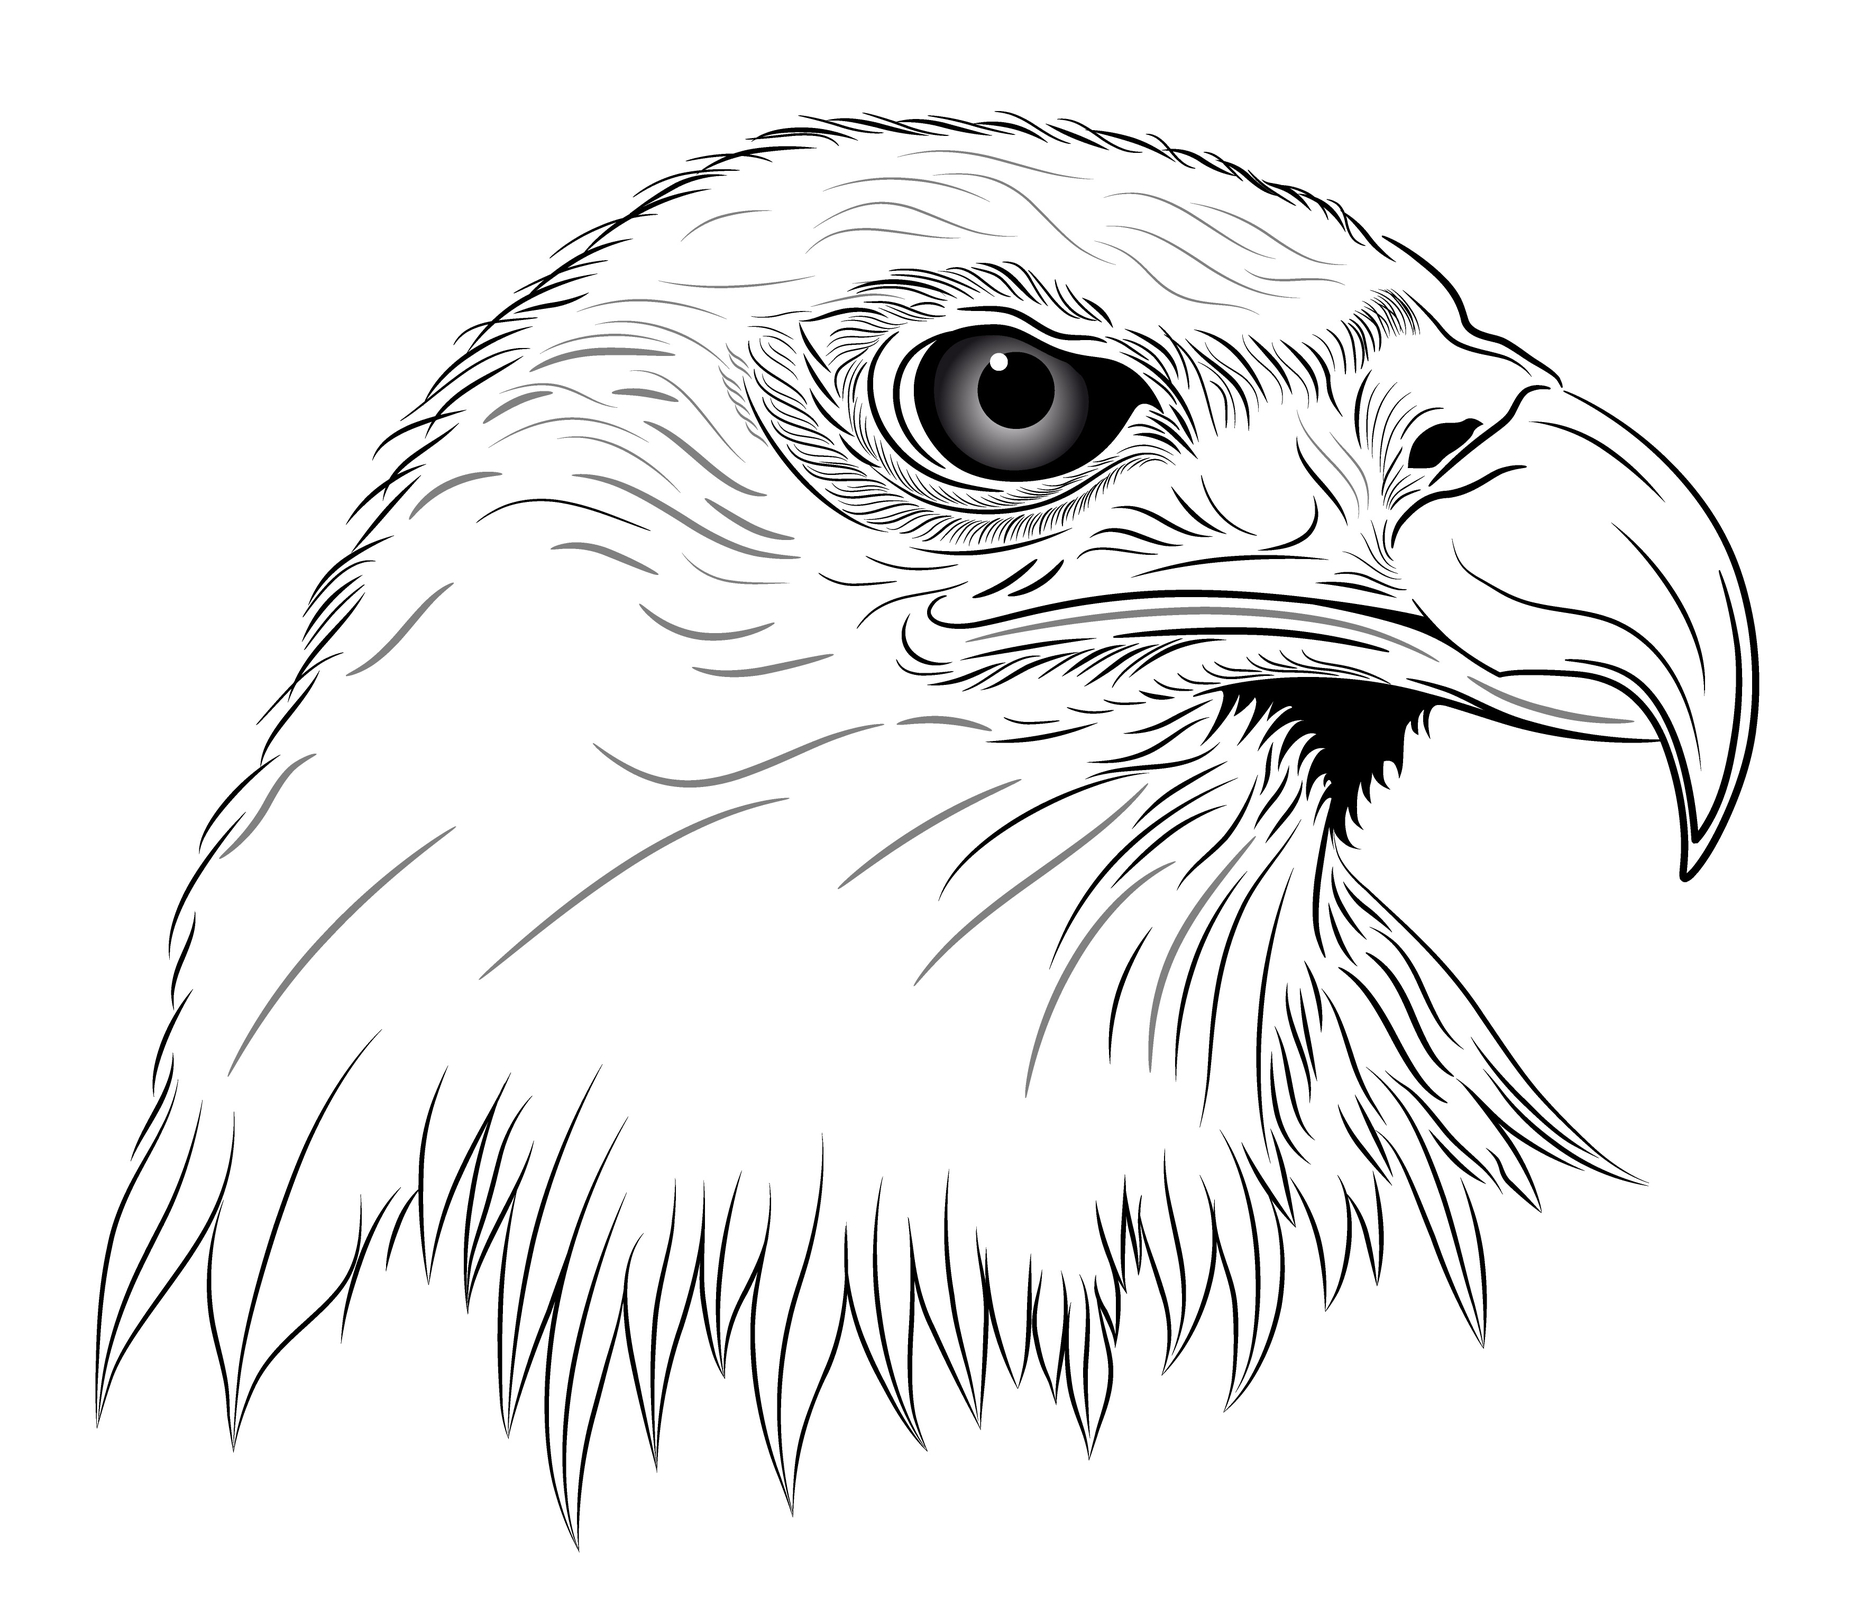 drawing eagle head tattoo - Clip Art Library